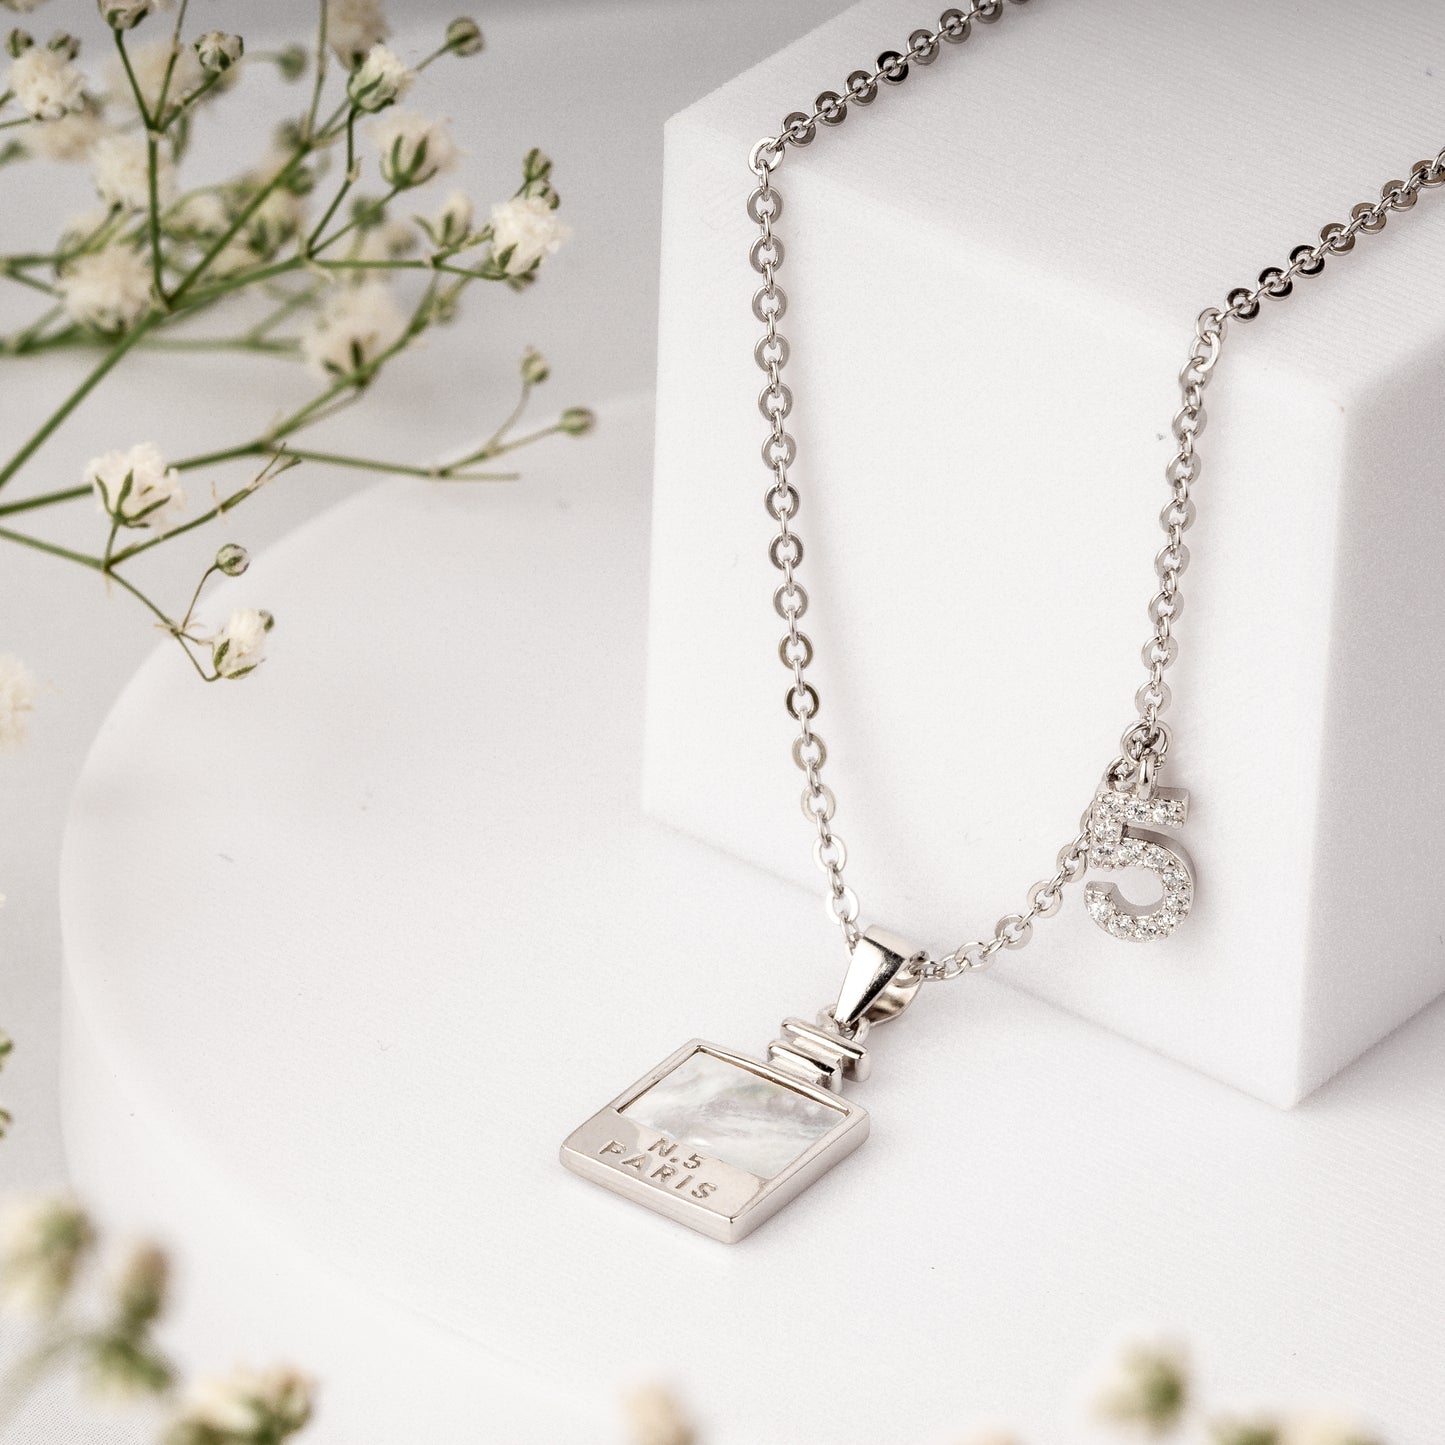 Silver TV With Charm Chain Pendant